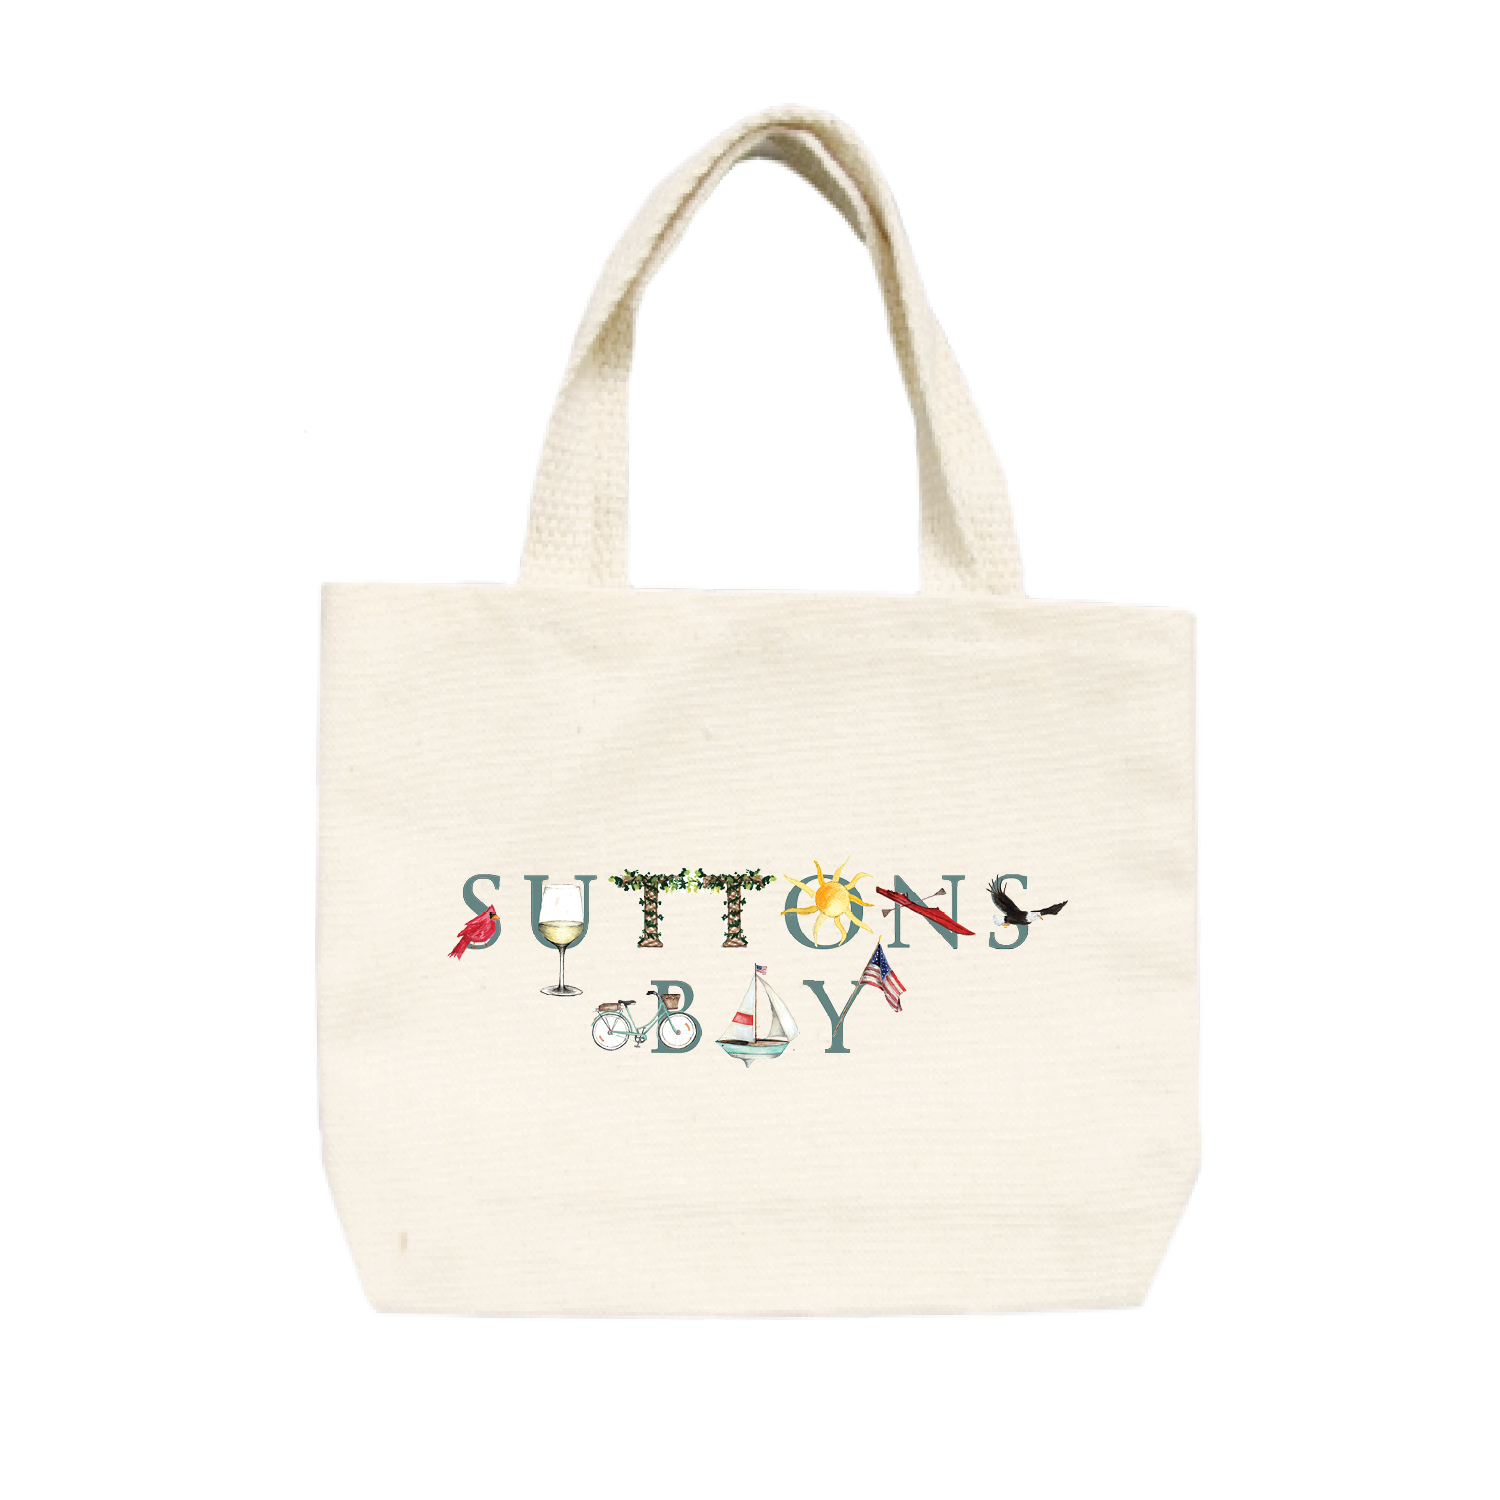 Suttons Bay small tote